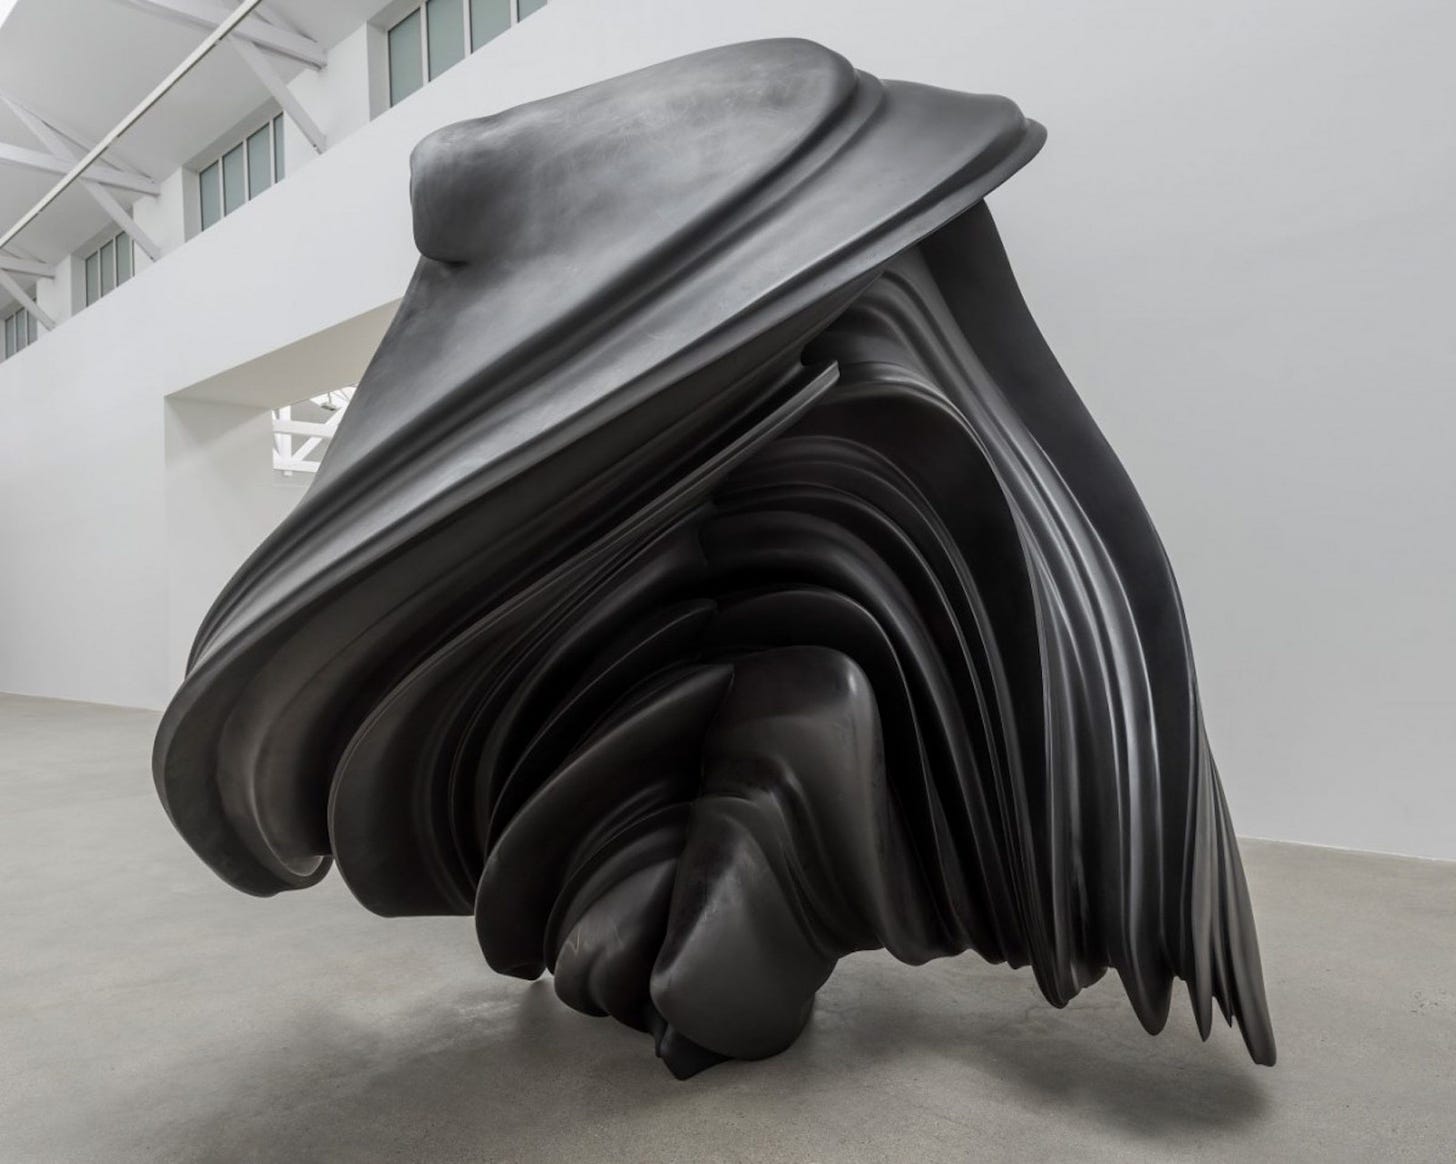 Sculptor Tony Cragg Creates Bold Works That “Embody A Frozen Moment Of  Movement” - IGNANT